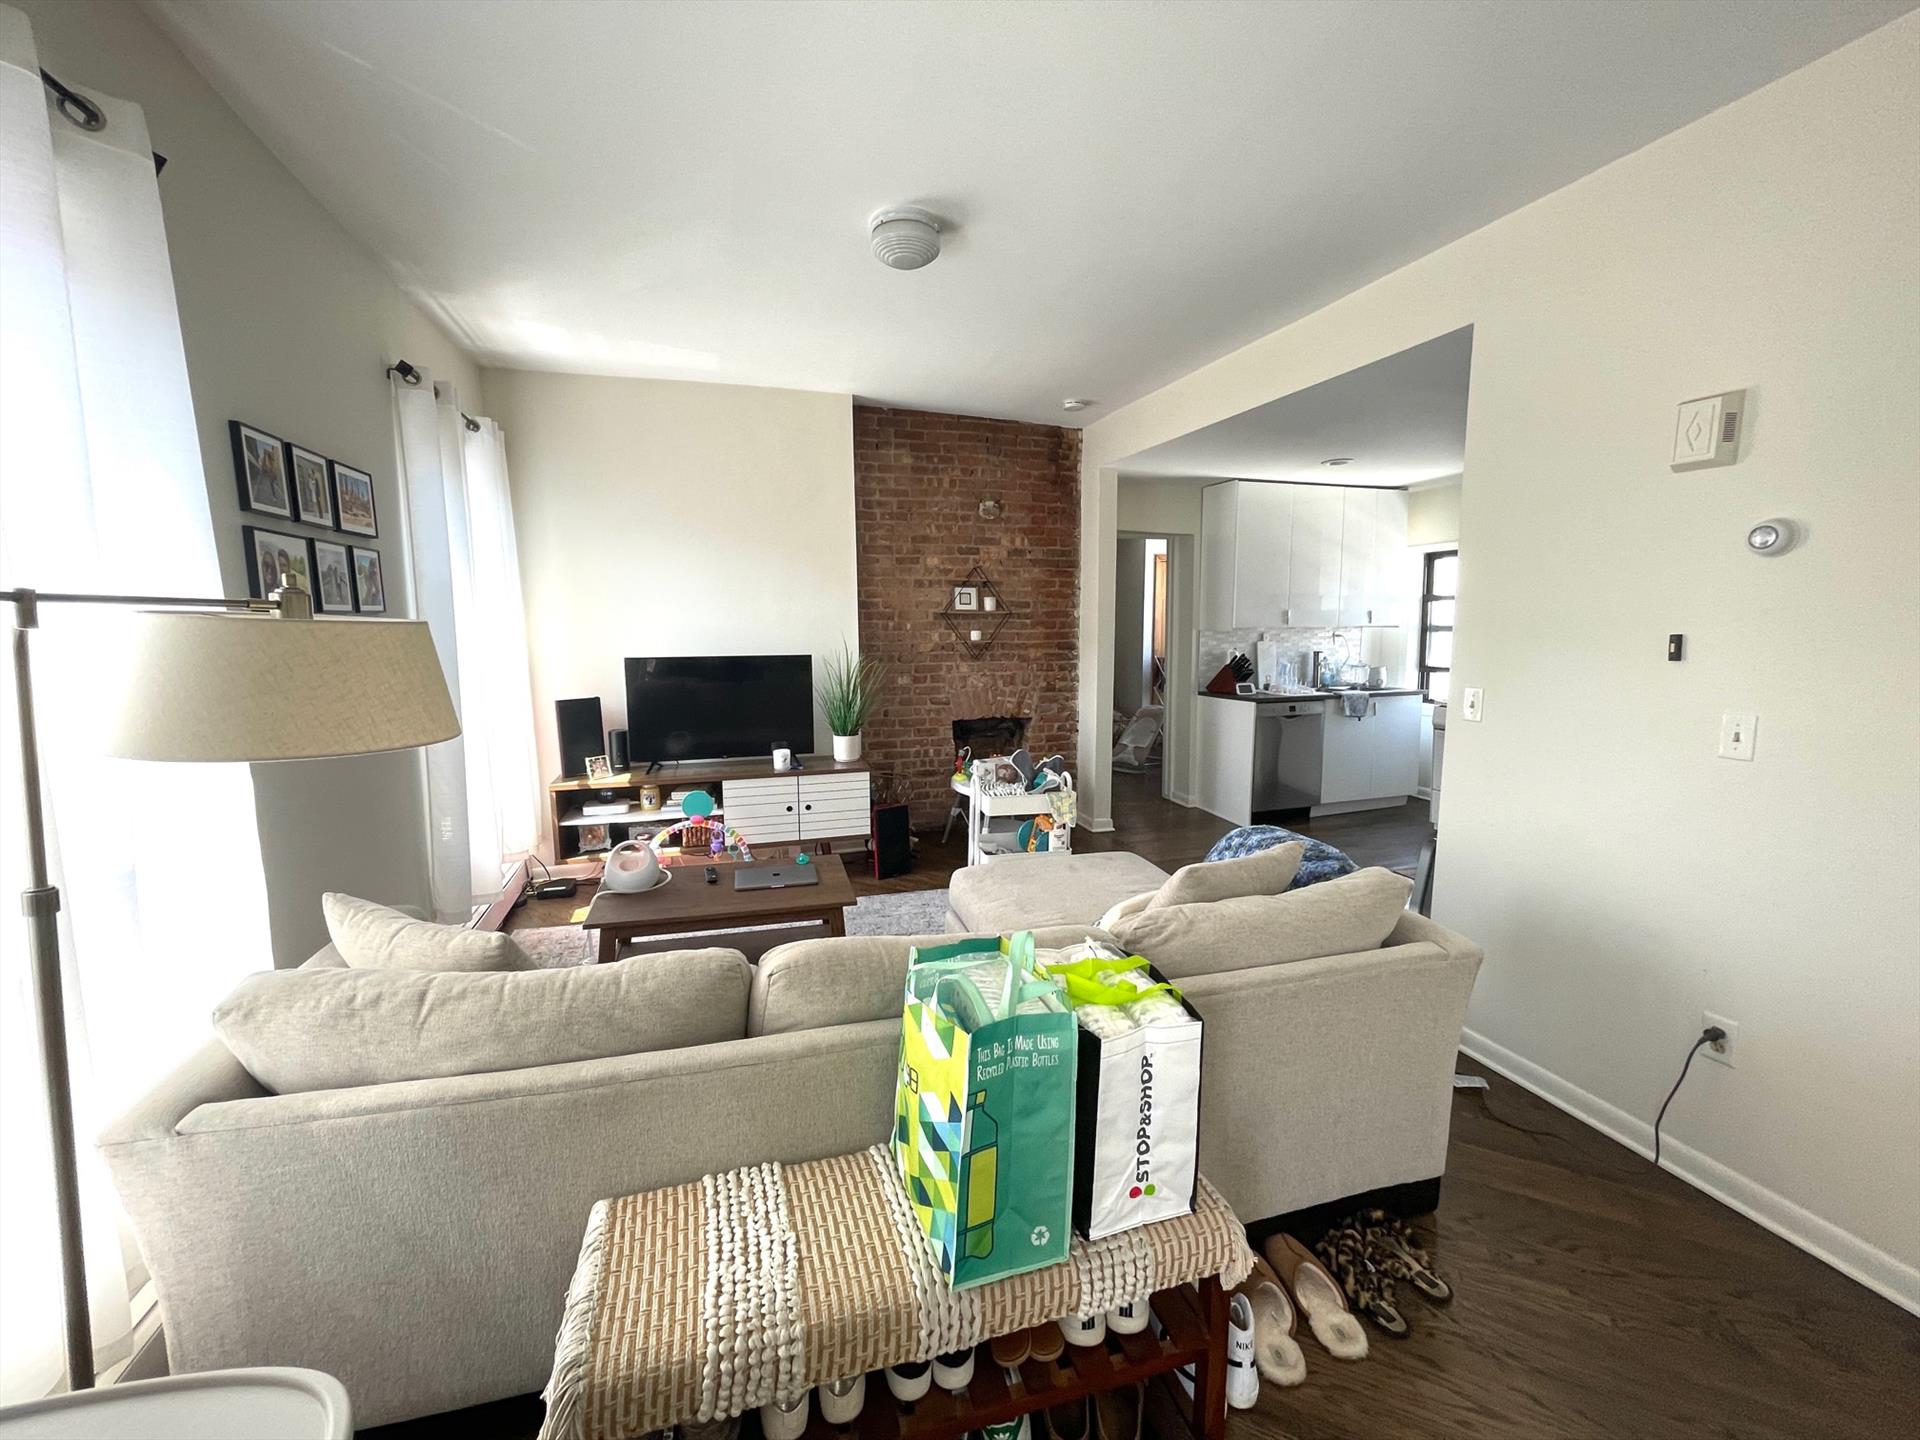 Welcome home to this Sunny, large 1 bedroom/1 bathroom unit with exposed brick walls in living area, updated modern kitchen, hardwood floors. Close to all shops, restaurants, train, bus, etc. Free laundry in building. Shared yard. Available June 1st 2023.
